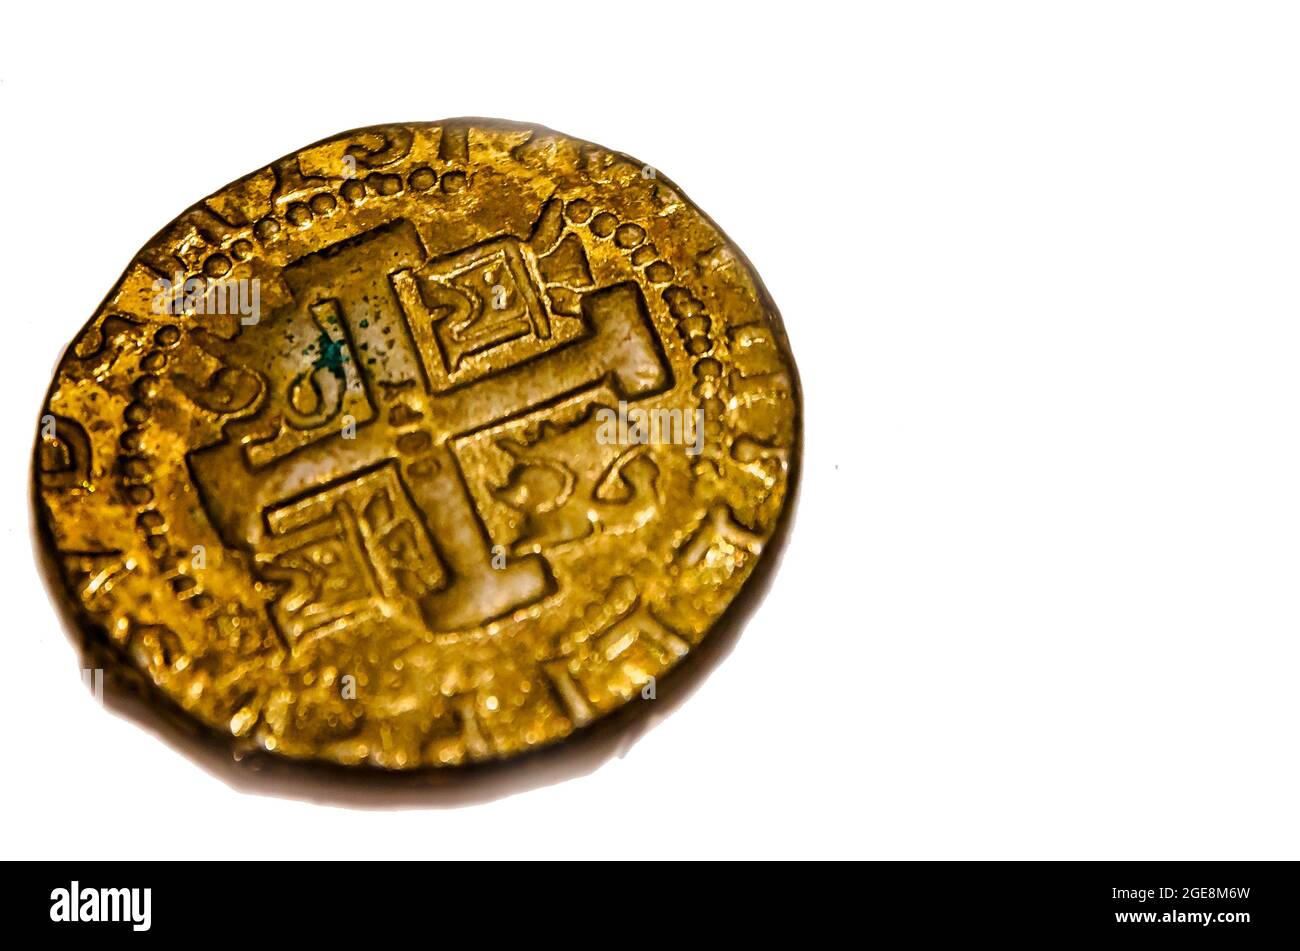 A replica of a 1736 Spanish doubloon is displayed at Fort Gaines museum, Aug. 12, 2021, in Dauphin Island, Alabama. Stock Photo